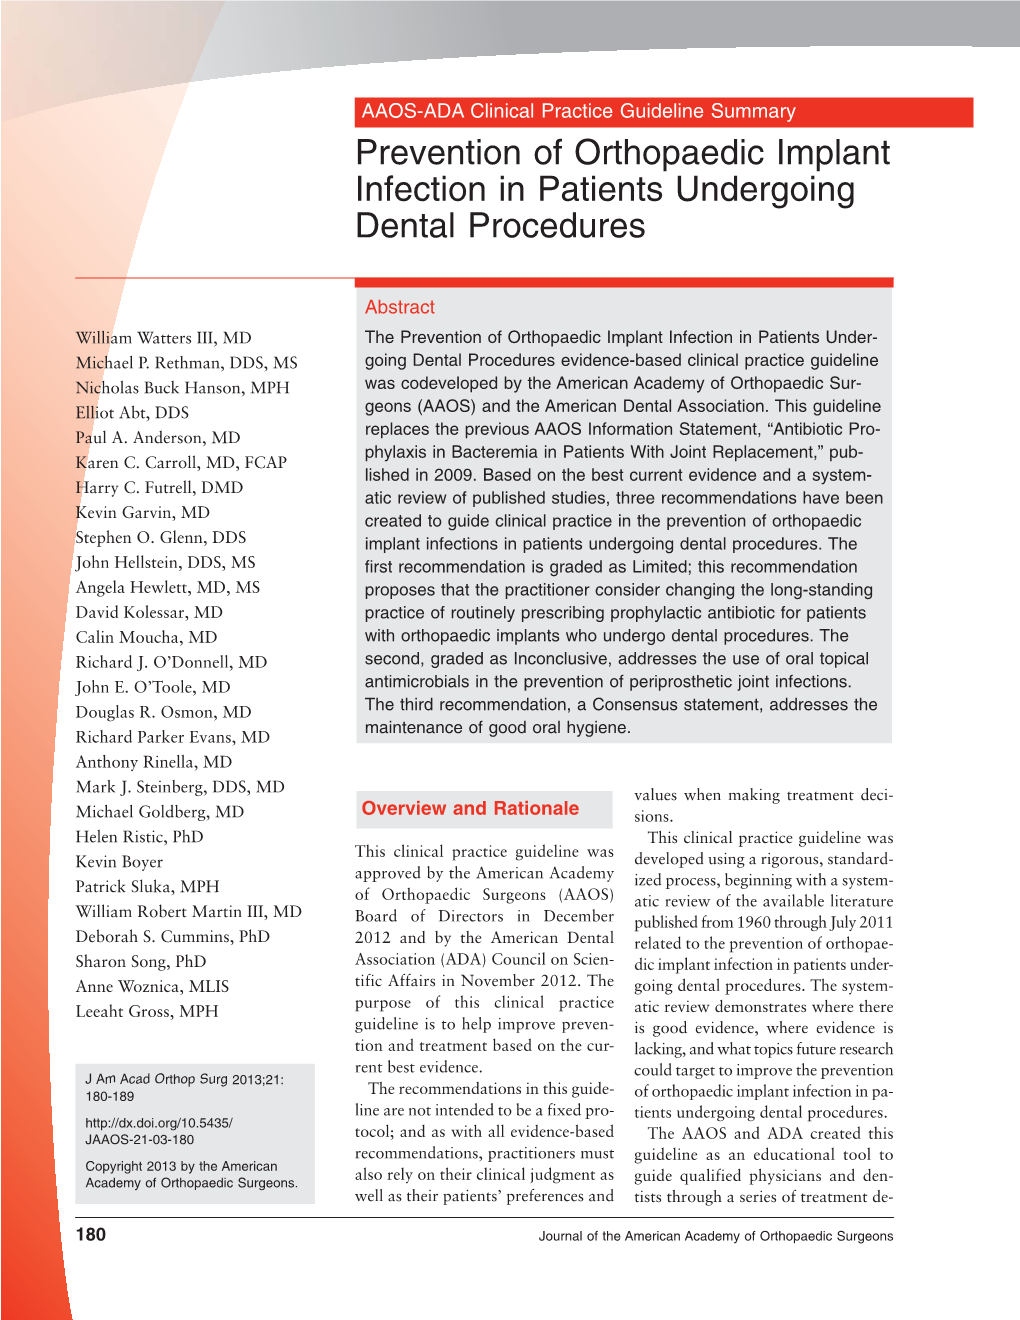 Prevention of Orthopaedic Implant Infection in Patients Undergoing Dental Procedures